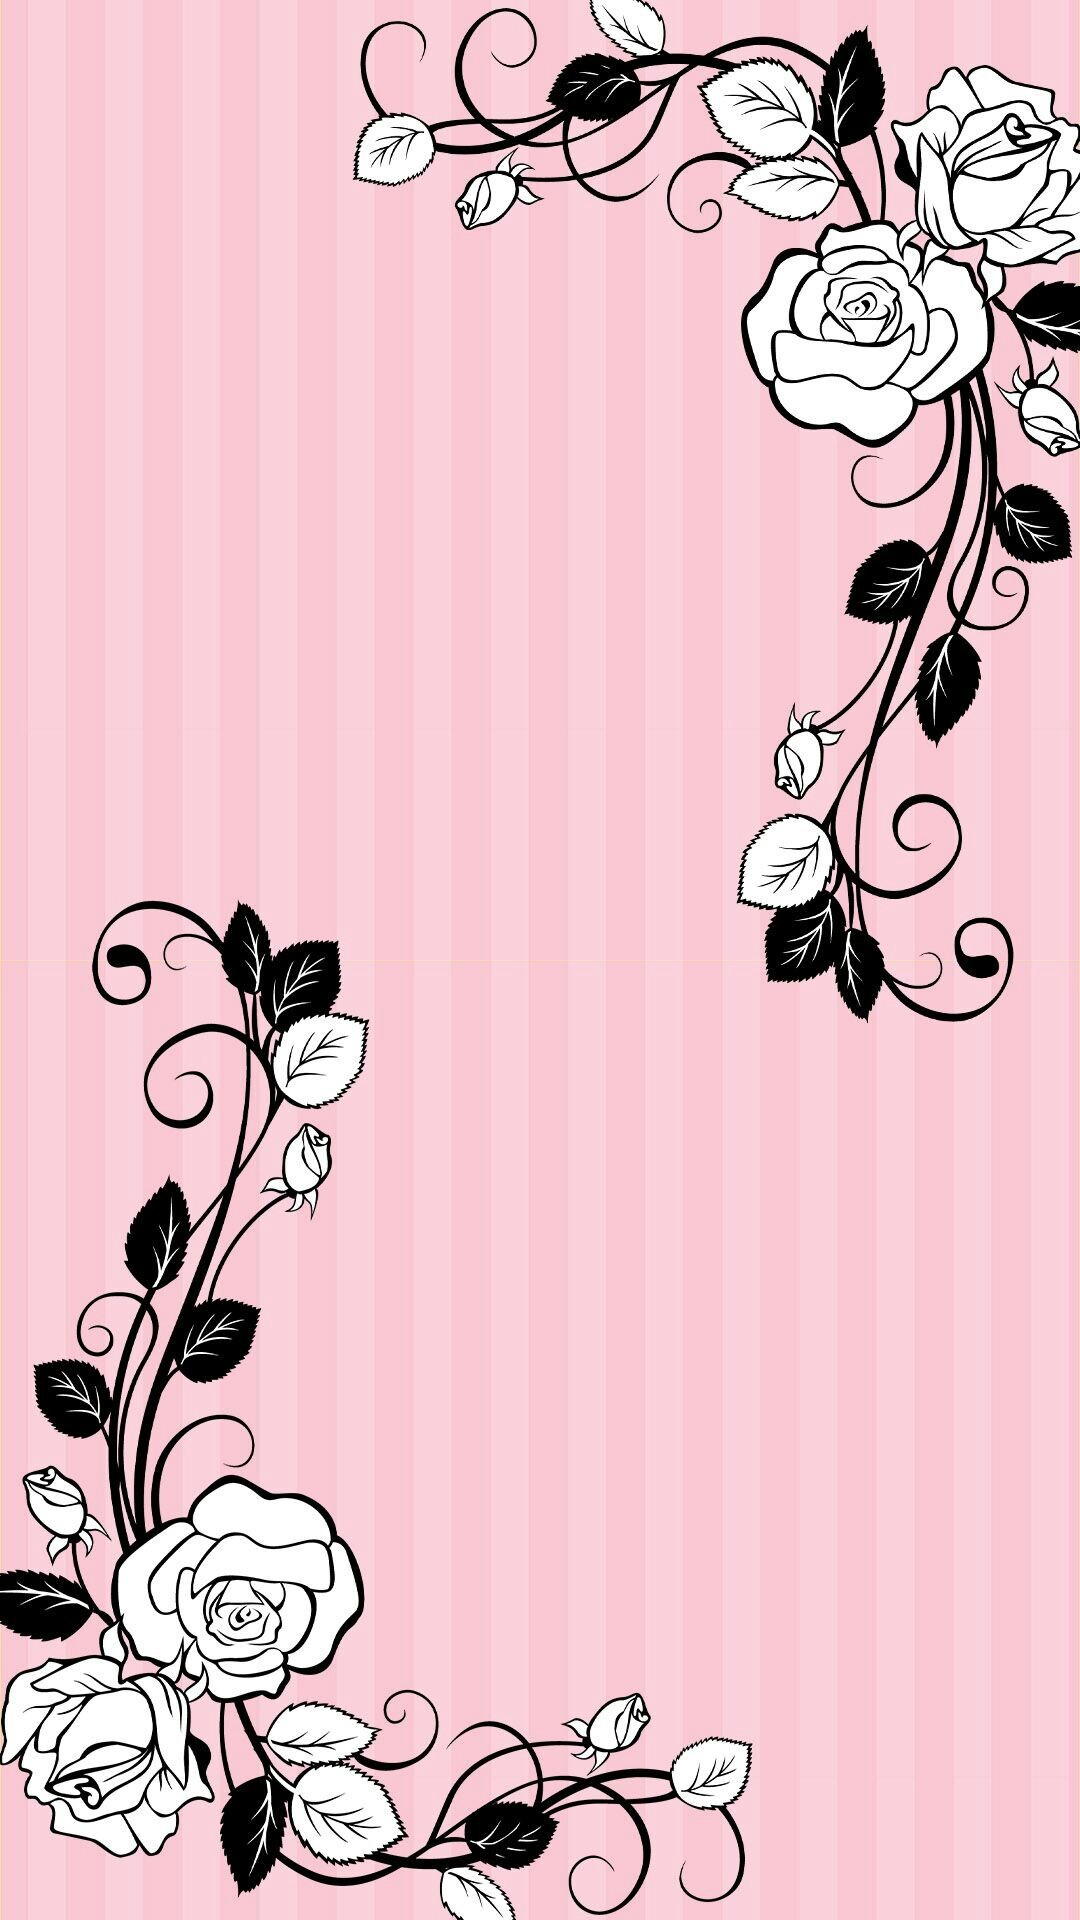 1080x1920 Photo Backgrounds, Wallpaper Backgrounds, Phone Wallpapers, Flowery  Wallpaper, Binder Covers, Paper Flowers, Hello Kitty, Gifs, Walls